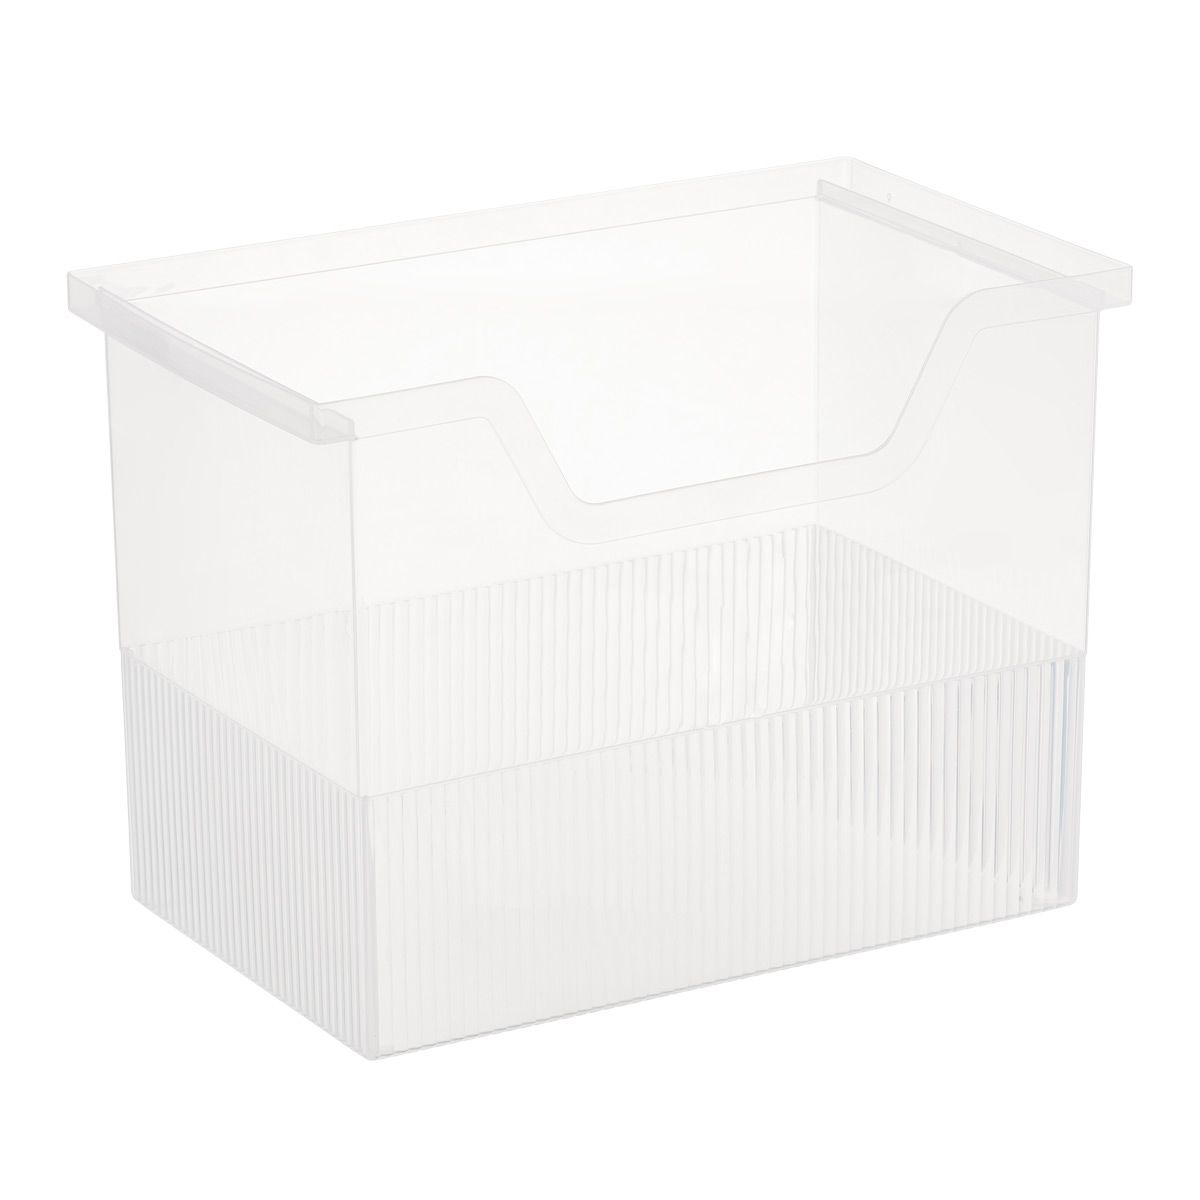 Large Open-Top File Box Translucent | The Container Store